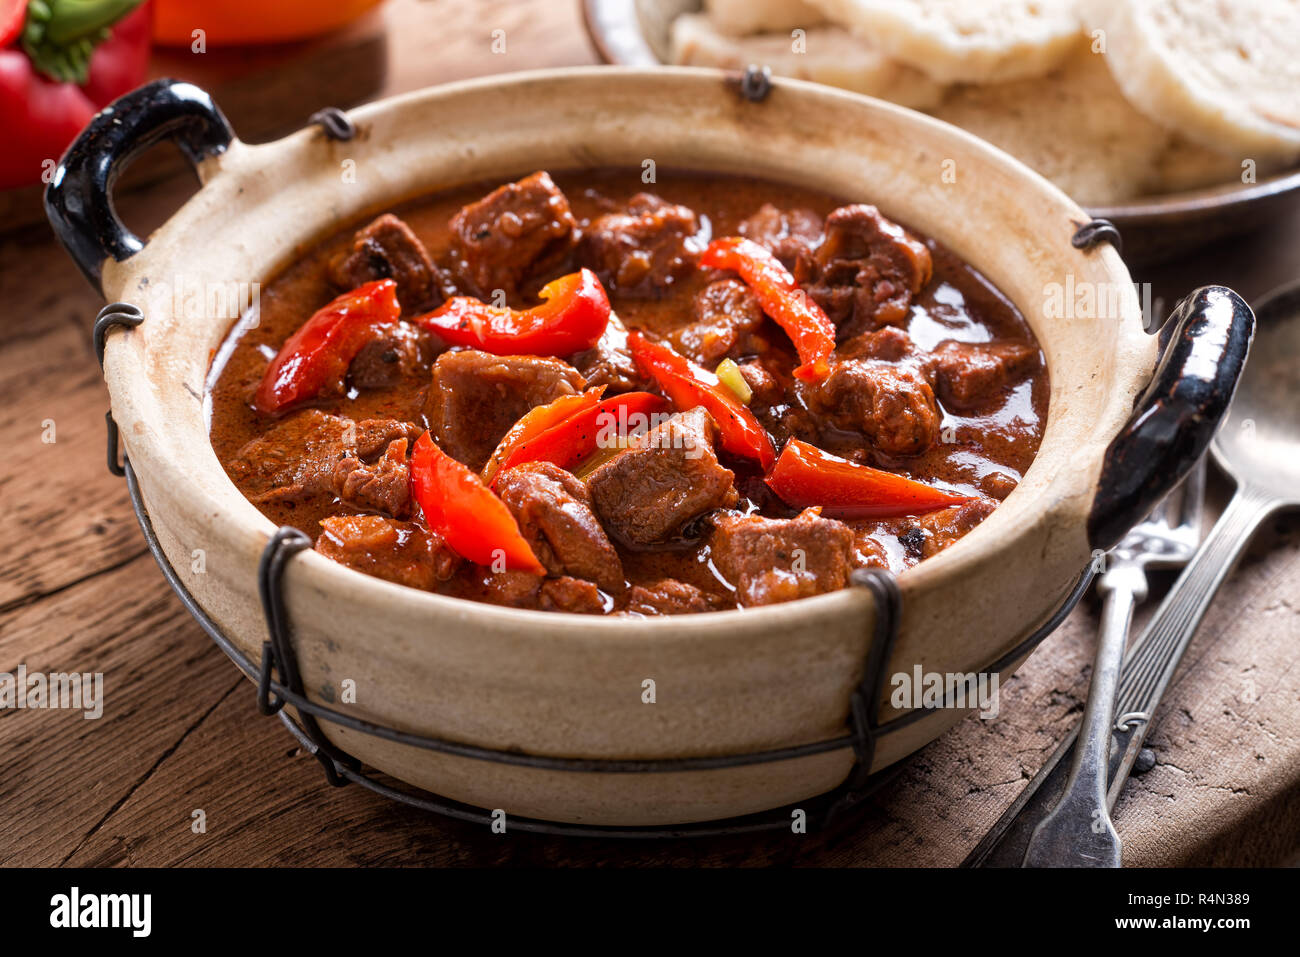 A bowl of delicious authentic Hungarian goulash with bread dumplings and red pepper garnish. Stock Photo